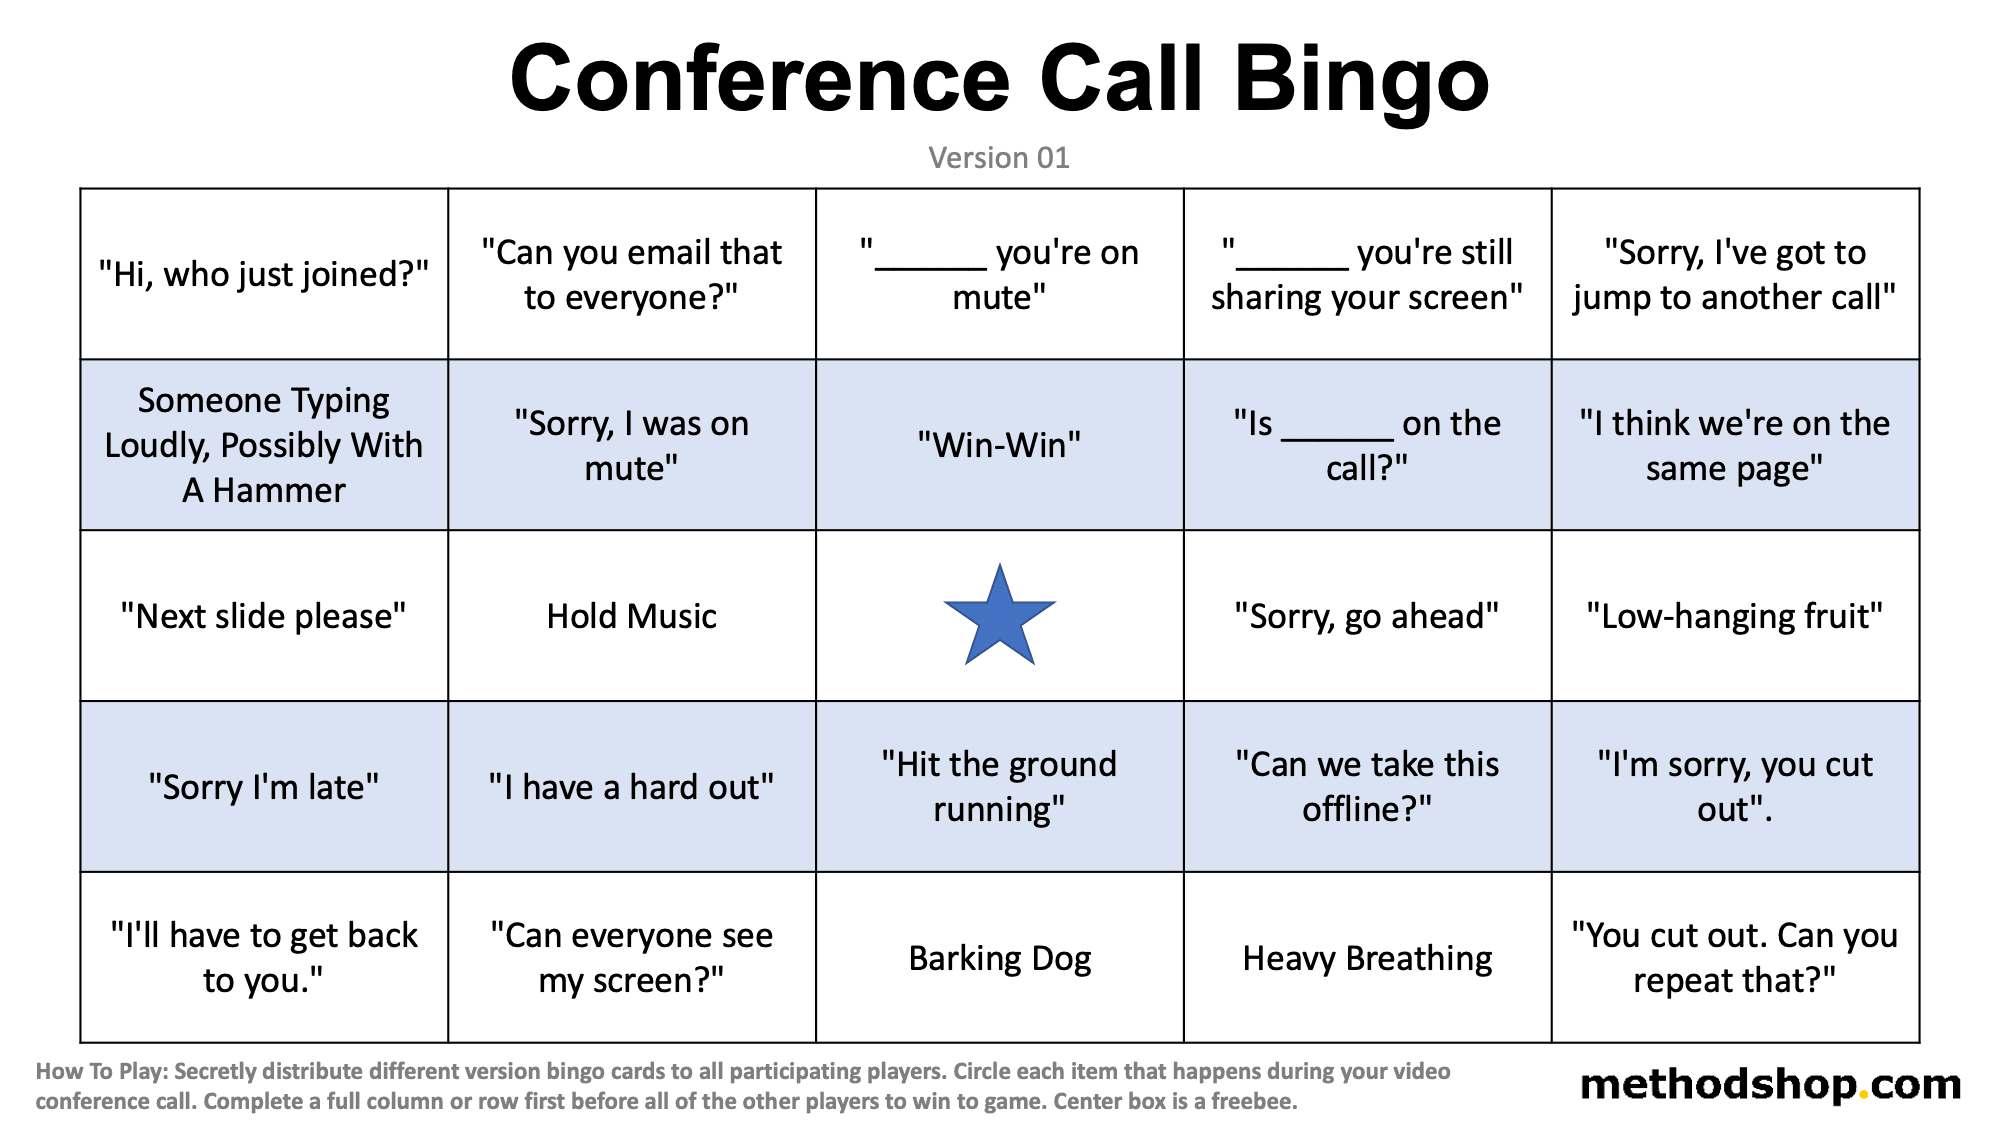 Conference Call Bingo: A Fun Game To Play With Your Coworkers